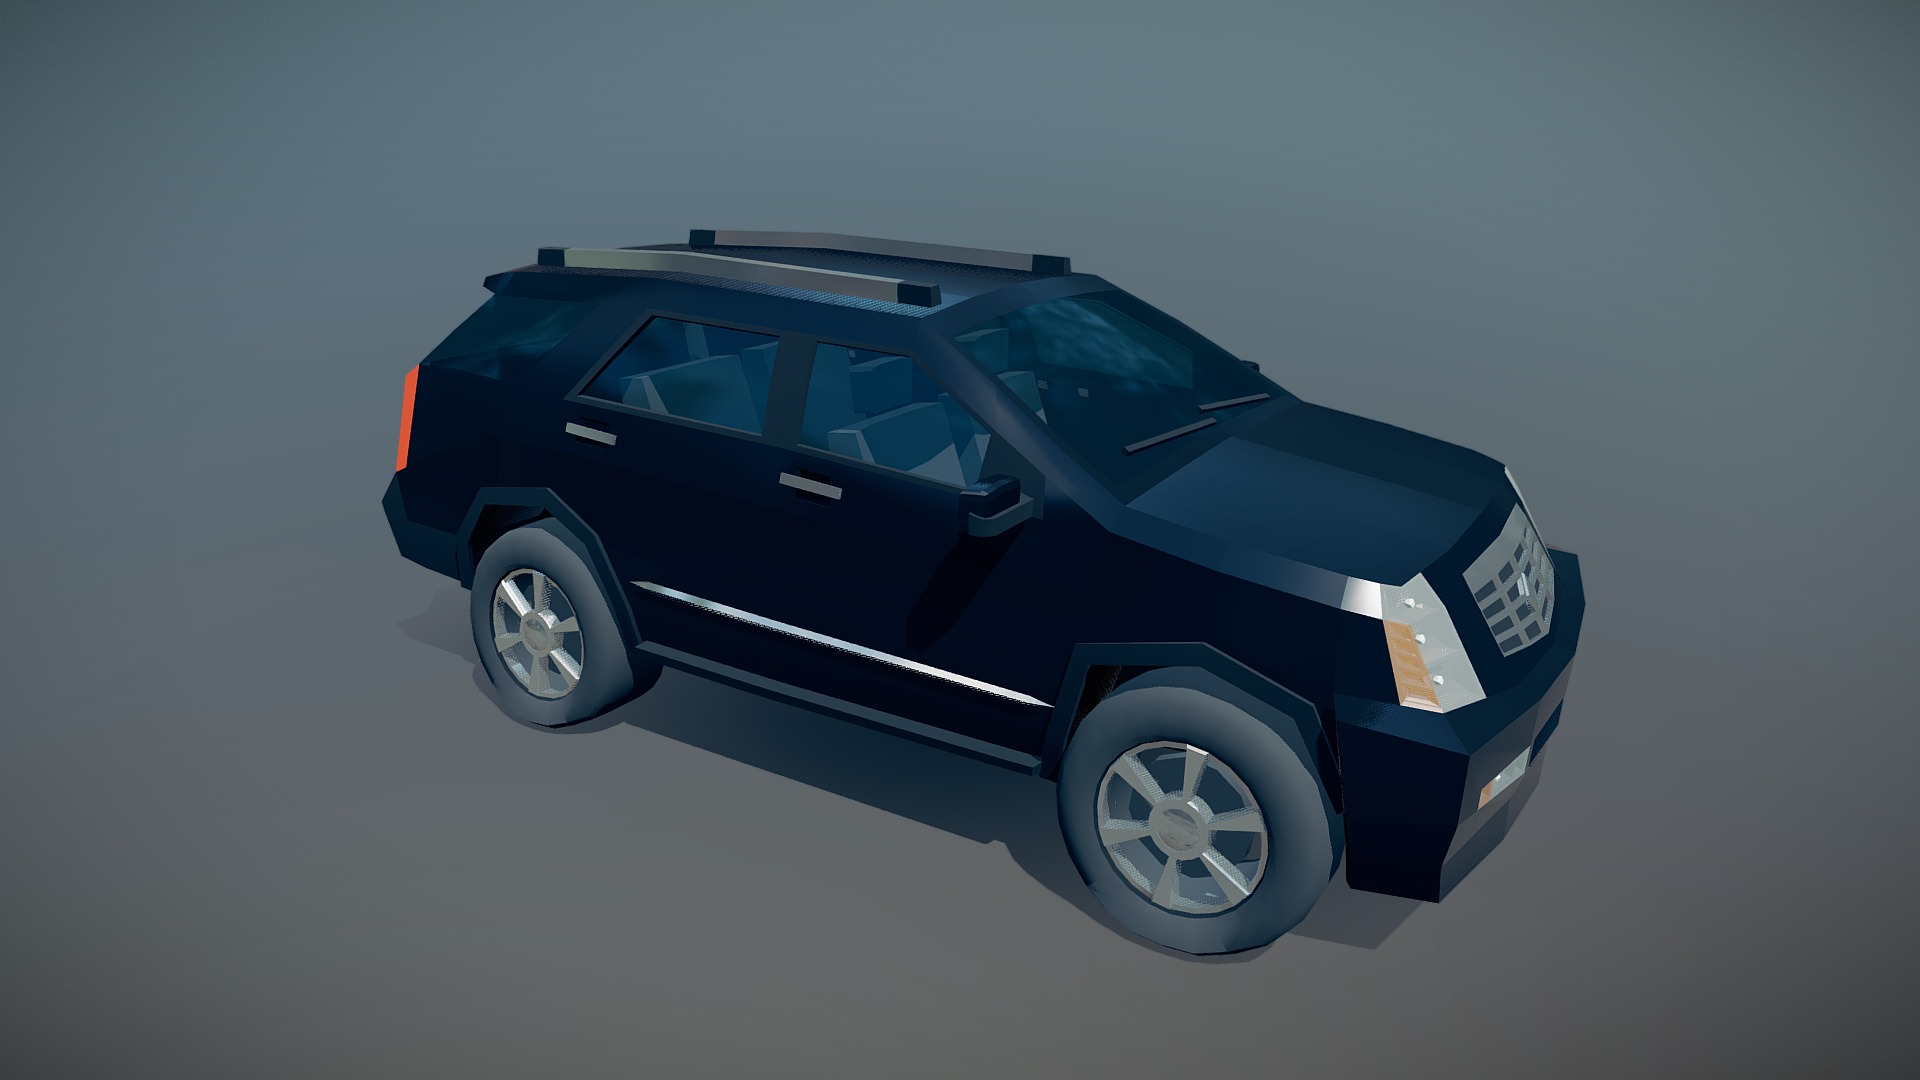 3D model SUV lowpoly - This is a 3D model of the SUV lowpoly. The 3D model is about a blue car with a spoiler.